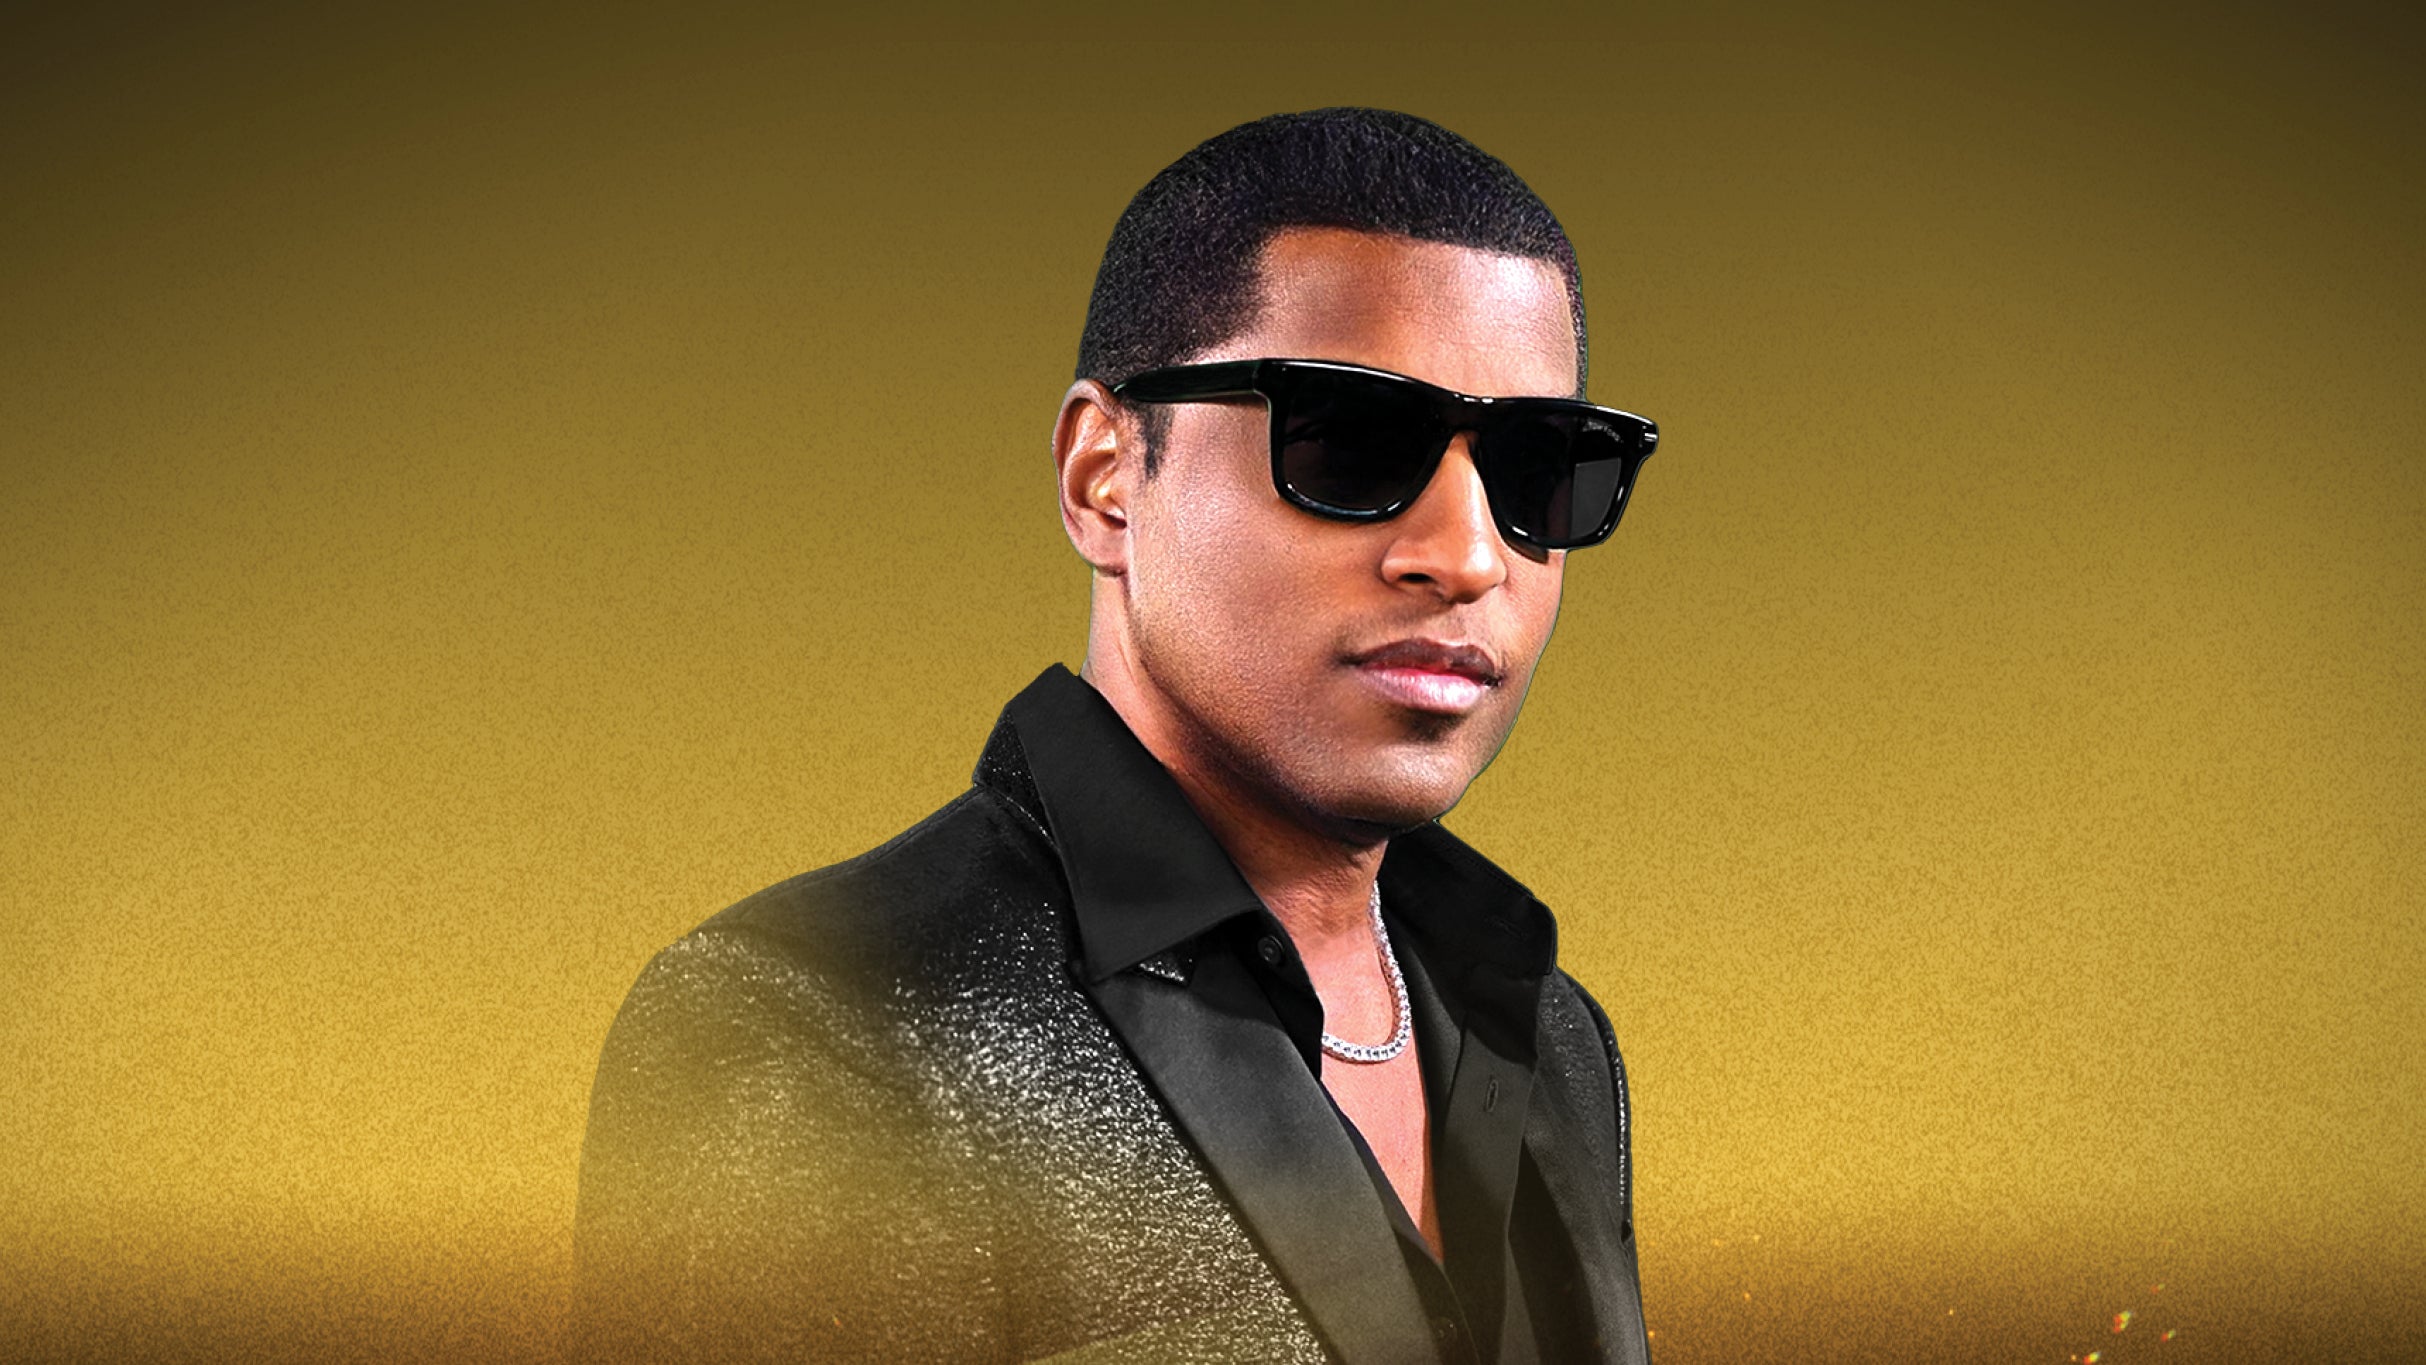 Babyface presale code for early tickets in Windsor